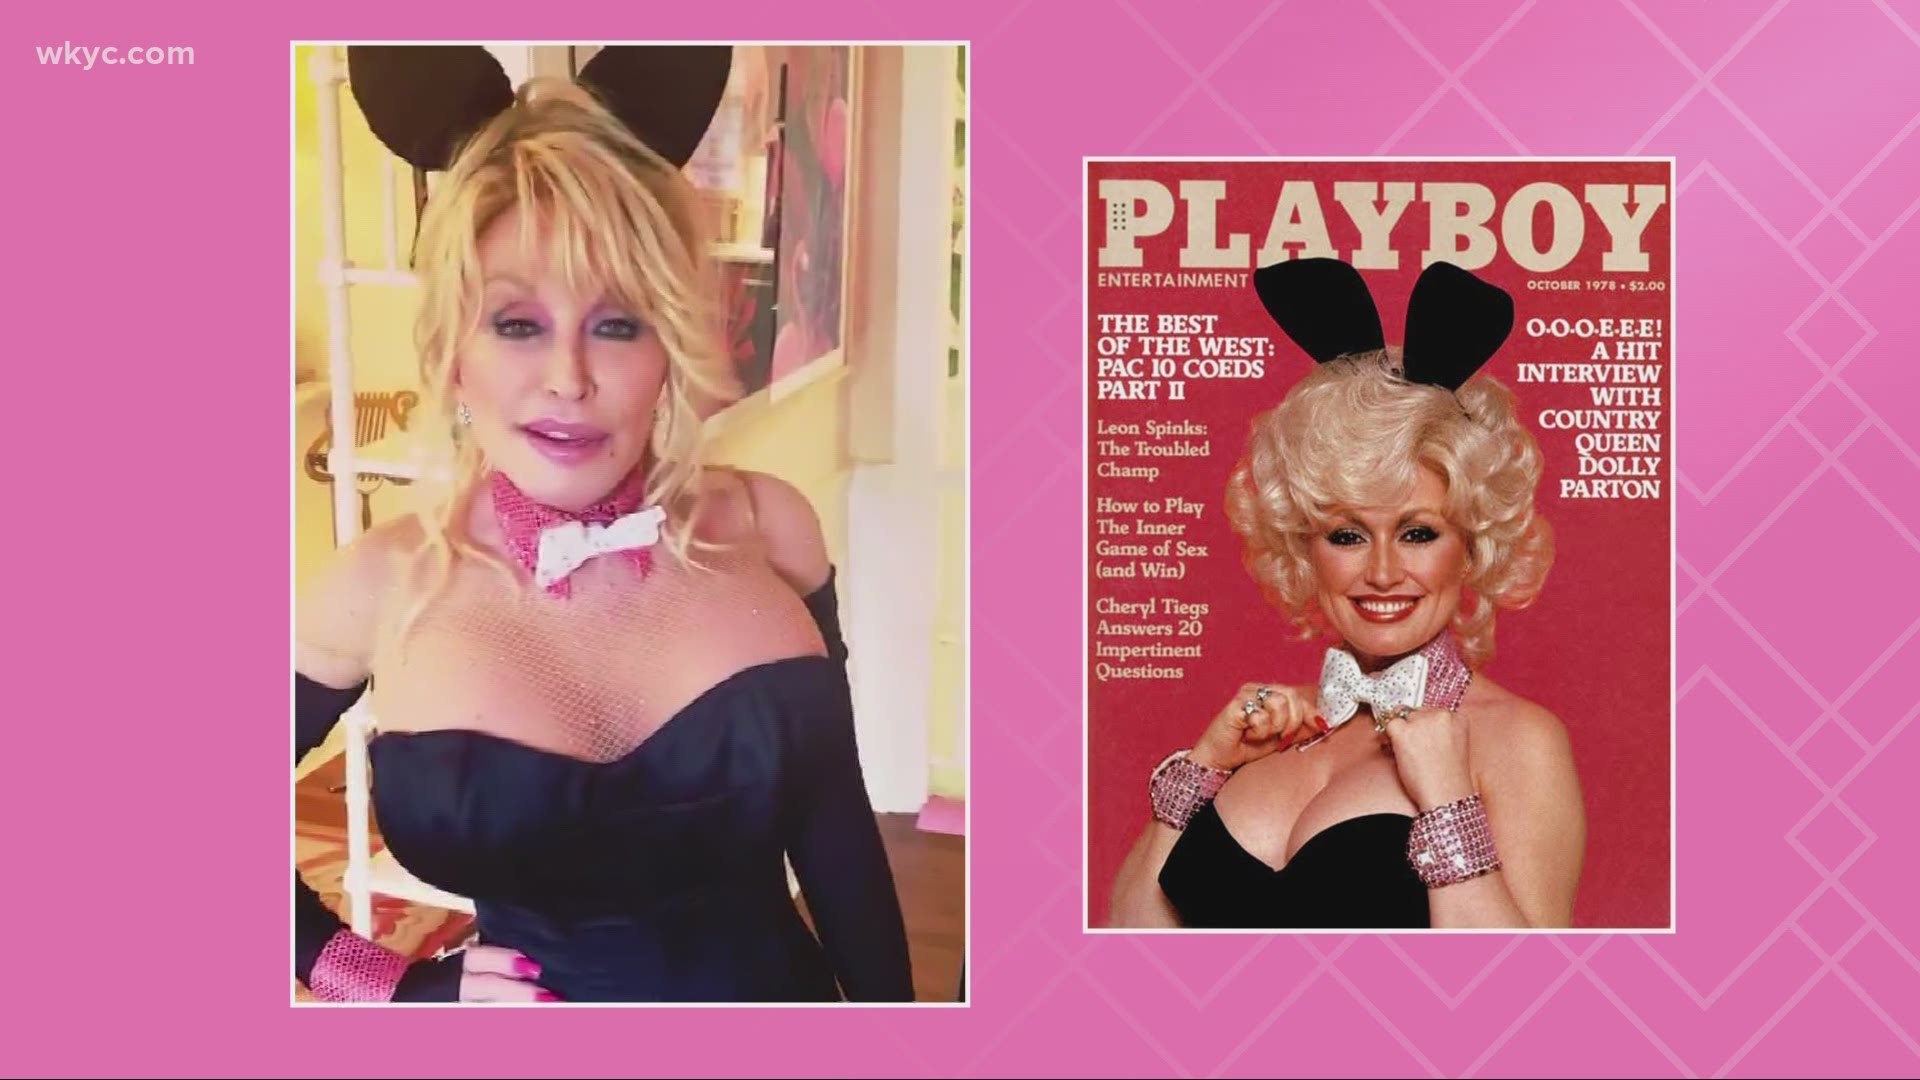 Dolly Parton recreated her Playboy cover for her spouse.